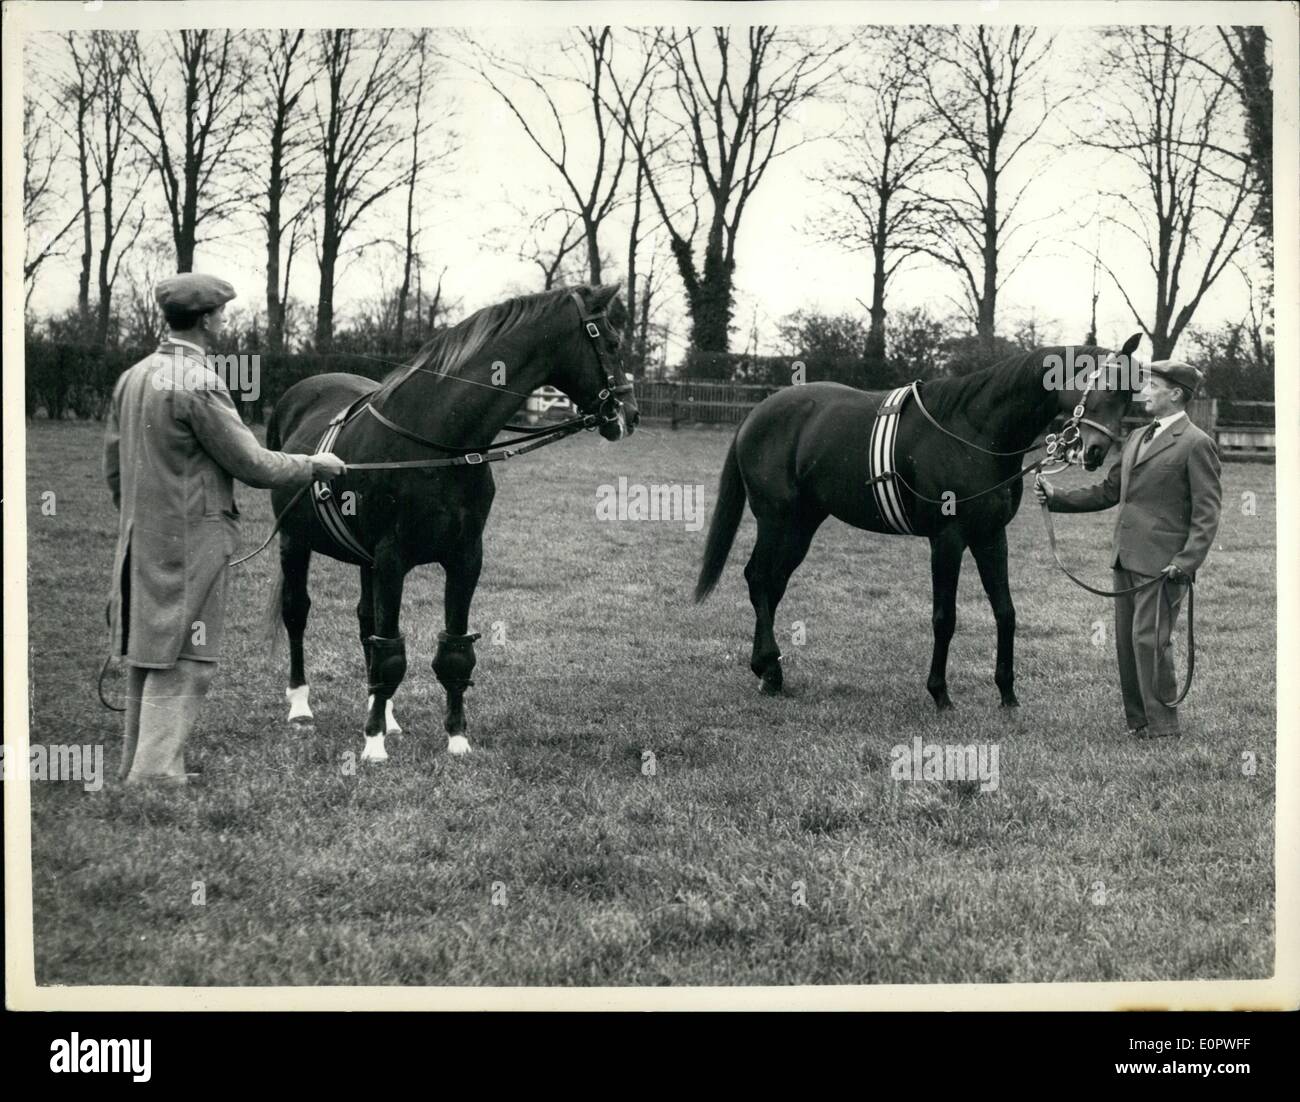 Jan. 01, 1957 - Italy's wonder horse in Britain, Ribot is exercised and fed: The world's most famous racehorse Italian owned ''Ribot'' is now settling down at the Stud in the New market stables owned by Lord Derby. American owners offered 50,000 for Ribot - but the offer was refused. The stud few of this fabulous horse if ,200 and even at that remarkable foo-dozens of applications have been refused because his program and time for the first two months period and two following seasons have been completely sold out Stock Photo